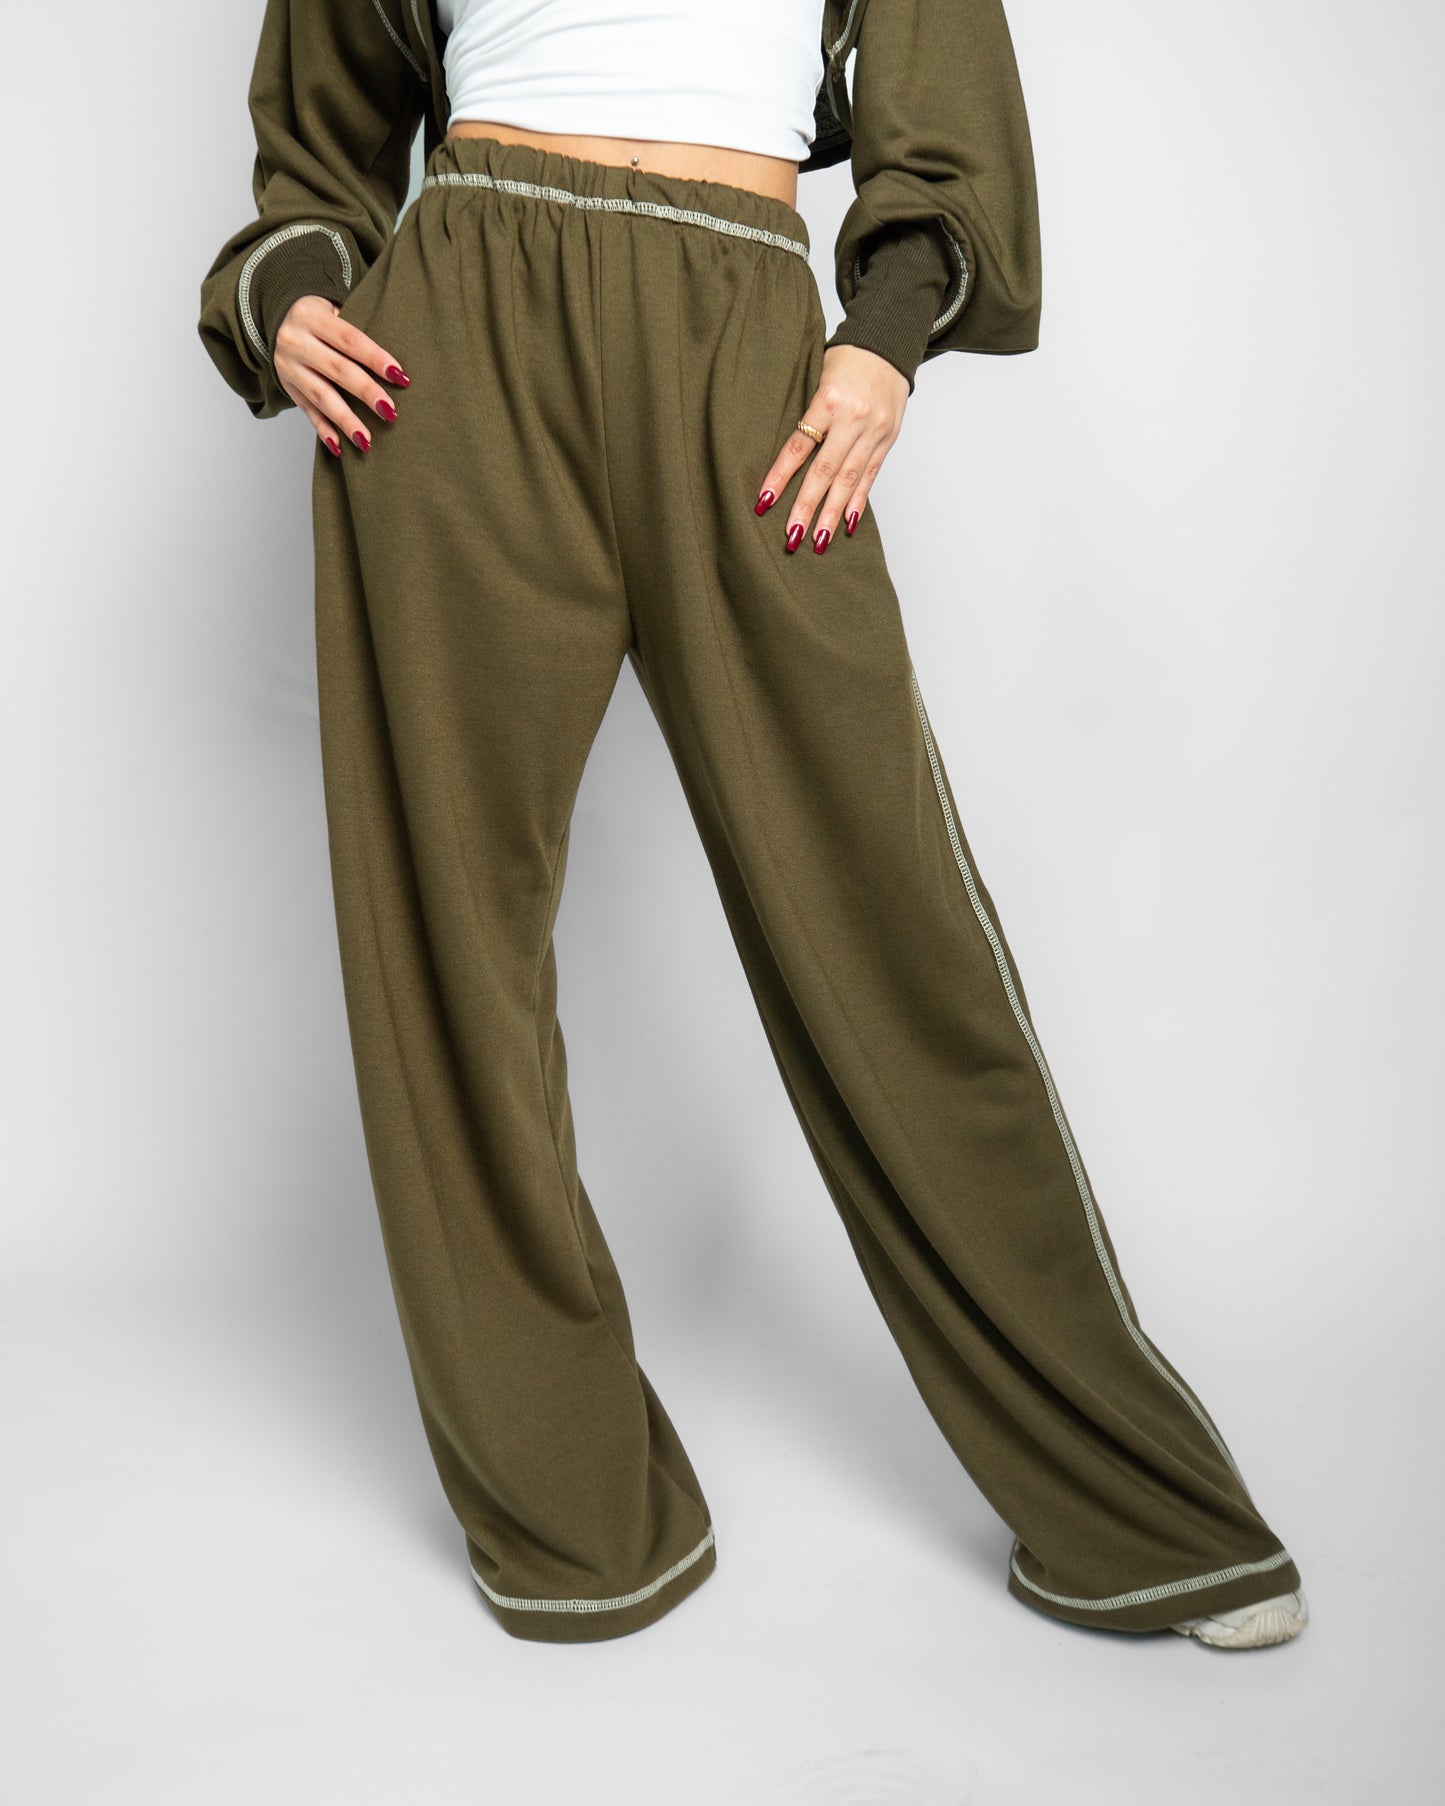 Go with the Flow Stitched Pants - OLIVE